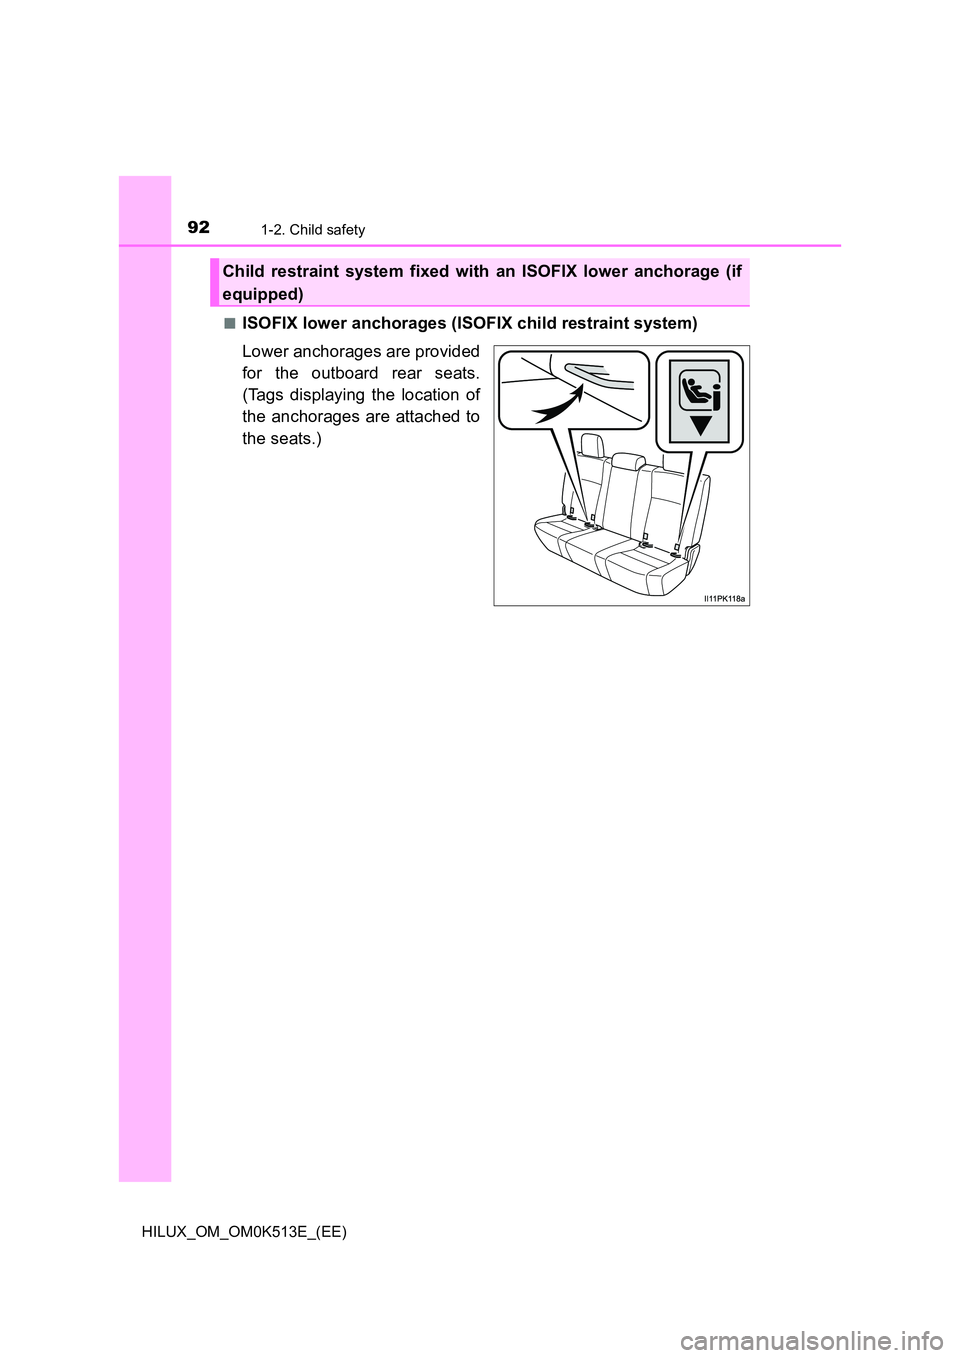 TOYOTA HILUX 2021  Owners Manual (in English) 921-2. Child safety
HILUX_OM_OM0K513E_(EE) 
�QISOFIX lower anchorages (ISOFIX child restraint system) 
Lower anchorages are provided 
for the outboard rear seats. 
(Tags displaying the location of 
th